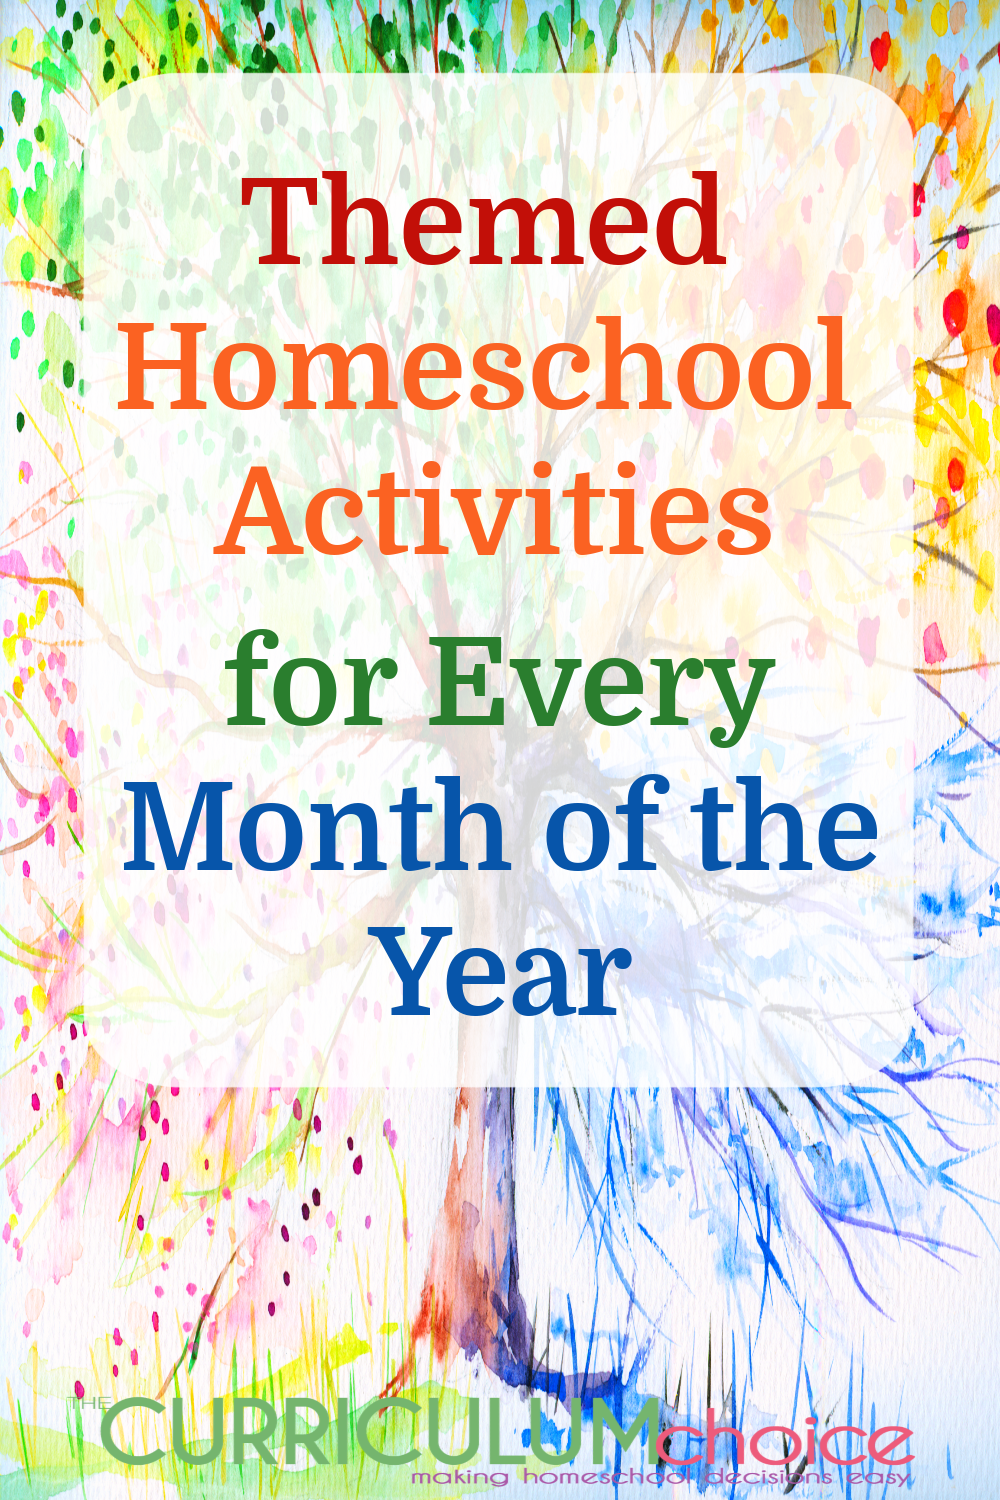 Engaging Themed Homeschool Activities for Every Month of the Year! Make learning fun by using monthly themed homeschool activities. Learn and explore based on the seasons, celebrate silly holidays, and more! 